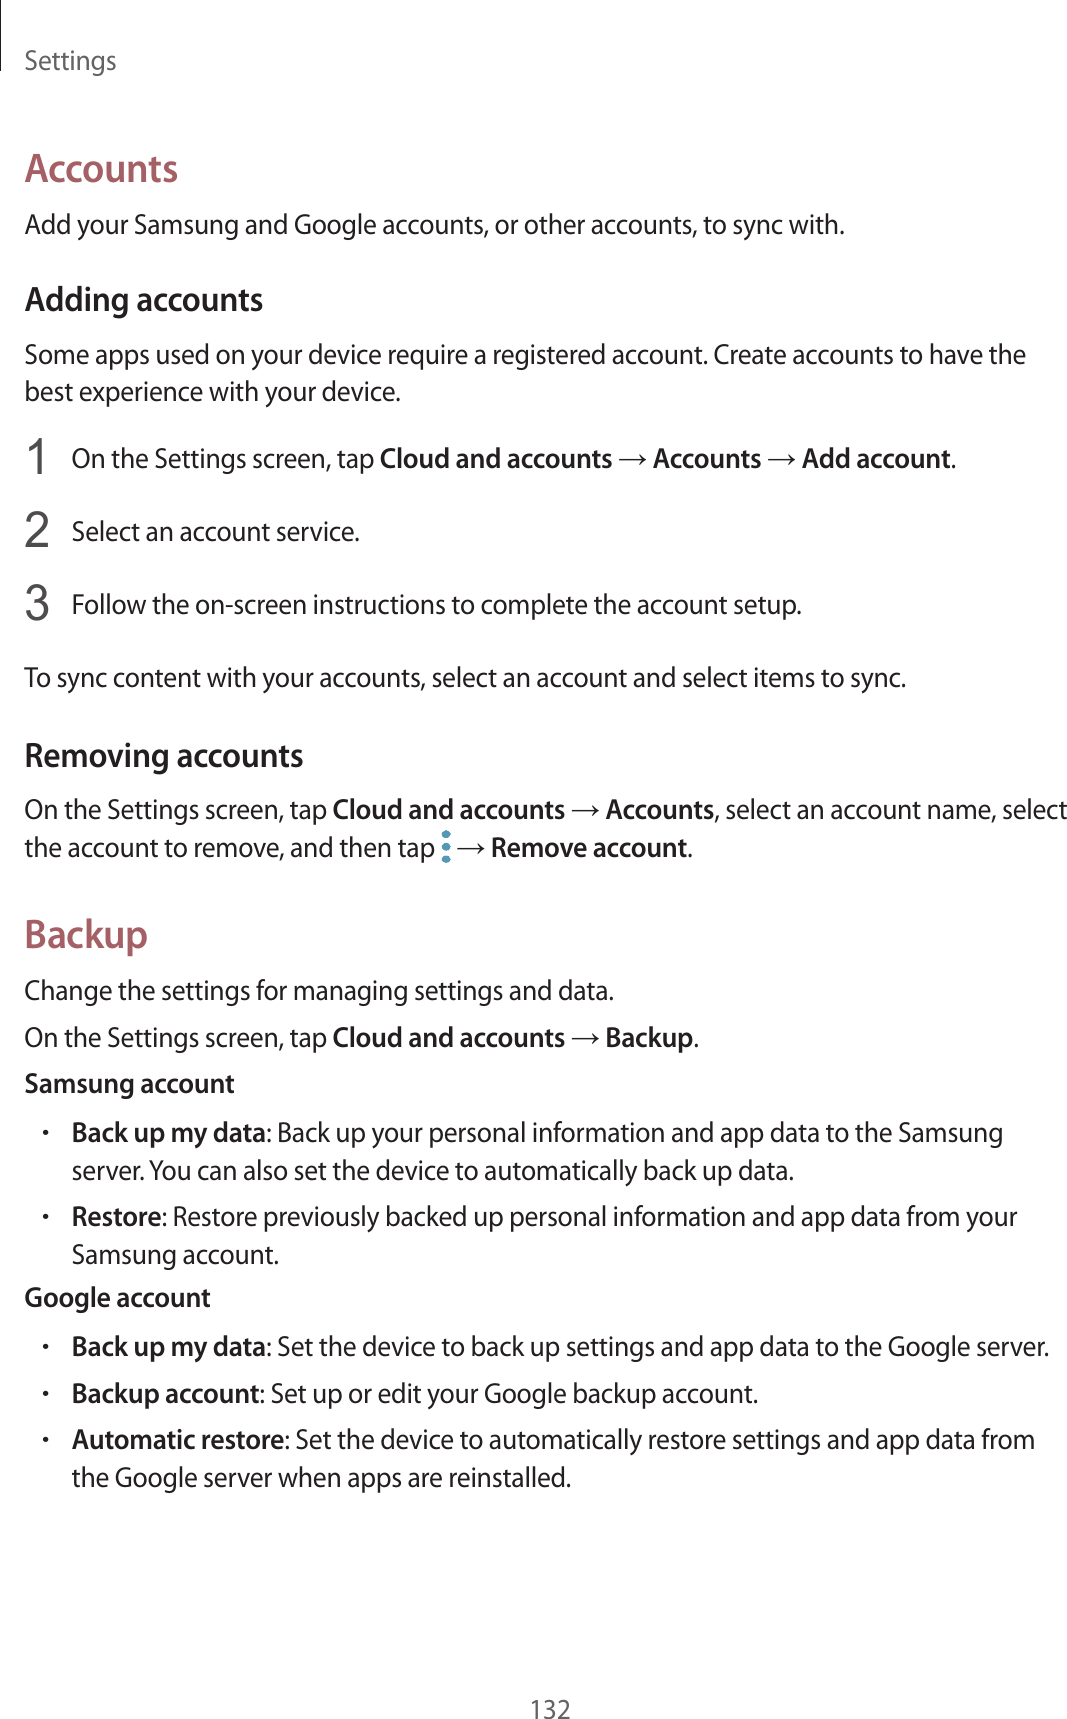 Settings132AccountsAdd your Samsung and Google accounts, or other accounts, to sync with.Adding accountsSome apps used on your device require a registered account. Create accounts to have the best experience with your device.1  On the Settings screen, tap Cloud and accounts → Accounts → Add account.2  Select an account service.3  Follow the on-screen instructions to complete the account setup.To sync content with your accounts, select an account and select items to sync.Removing accountsOn the Settings screen, tap Cloud and accounts → Accounts, select an account name, select the account to remove, and then tap   → Remove account.BackupChange the settings for managing settings and data.On the Settings screen, tap Cloud and accounts → Backup.Samsung account•Back up my data: Back up your personal information and app data to the Samsung server. You can also set the device to automatically back up data.•Restore: Restore previously backed up personal information and app data from your Samsung account.Google account•Back up my data: Set the device to back up settings and app data to the Google server.•Backup account: Set up or edit your Google backup account.•Automatic restore: Set the device to automatically restore settings and app data from the Google server when apps are reinstalled.